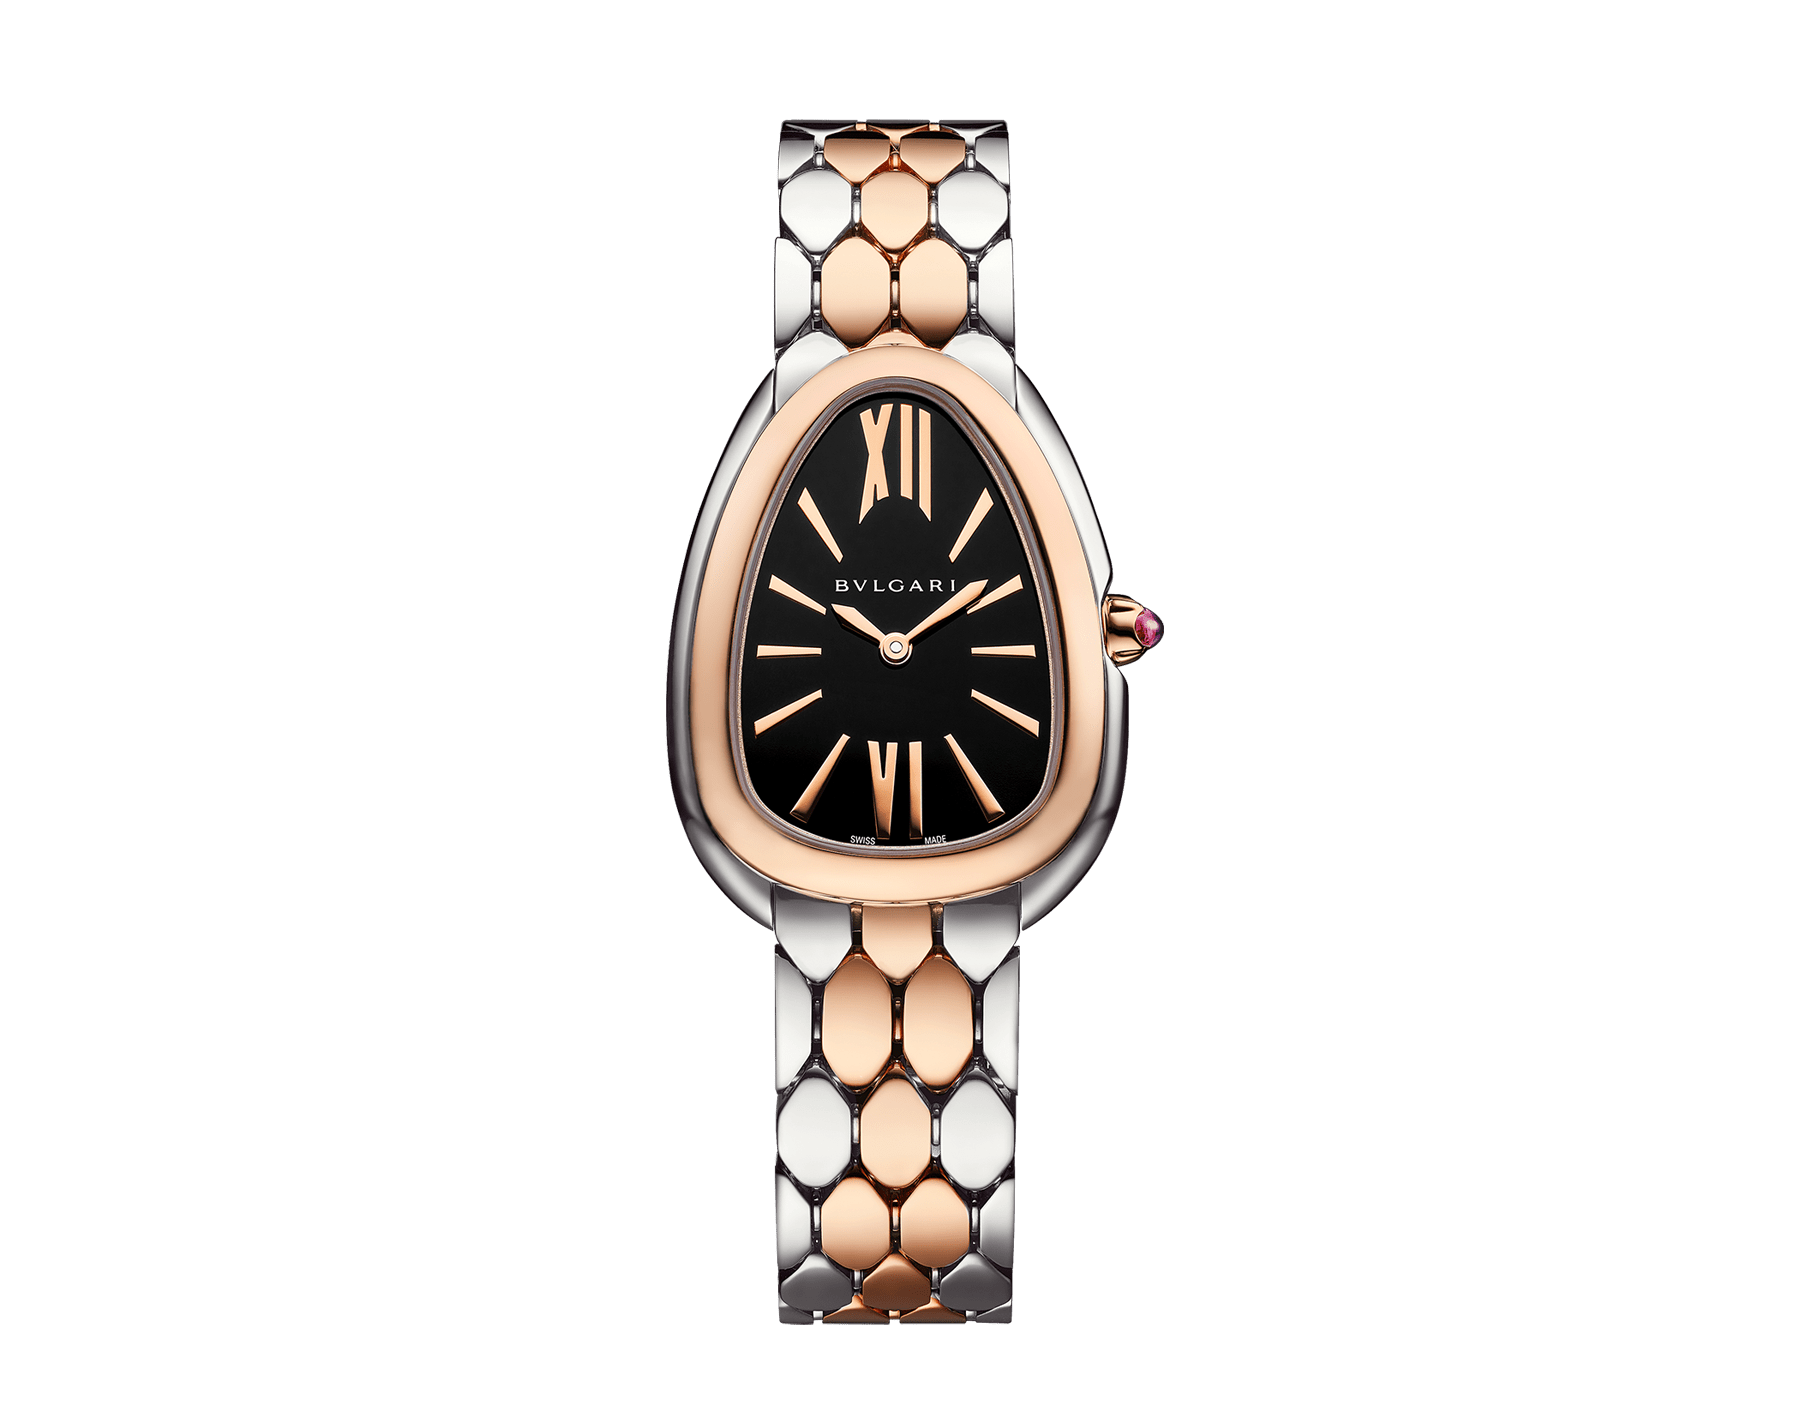 Serpenti Seduttori watch in stainless steel and 18 kt rose gold with black lacquered dial. Water-resistant up to 30 meters. 103799 image 1